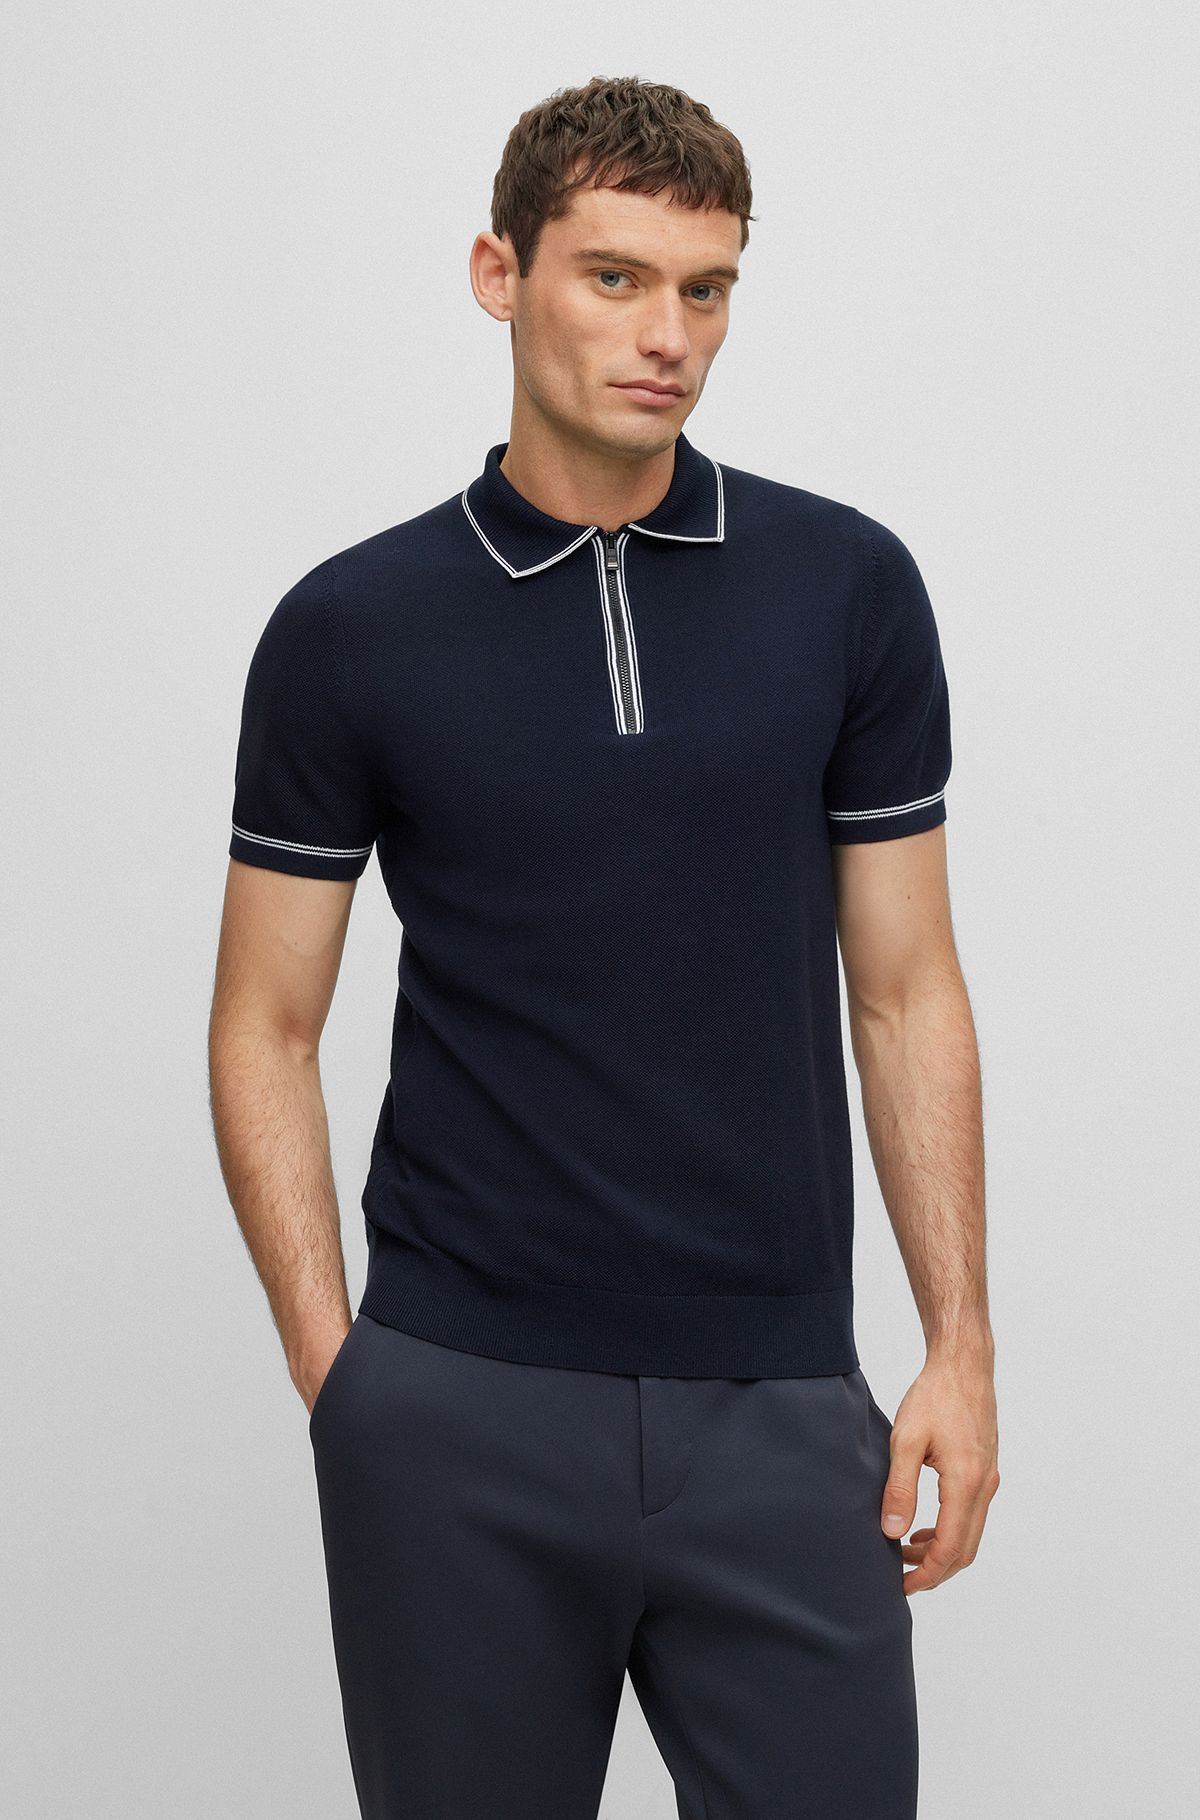 Regular-fit polo sweater with zip placket, Dark Blue